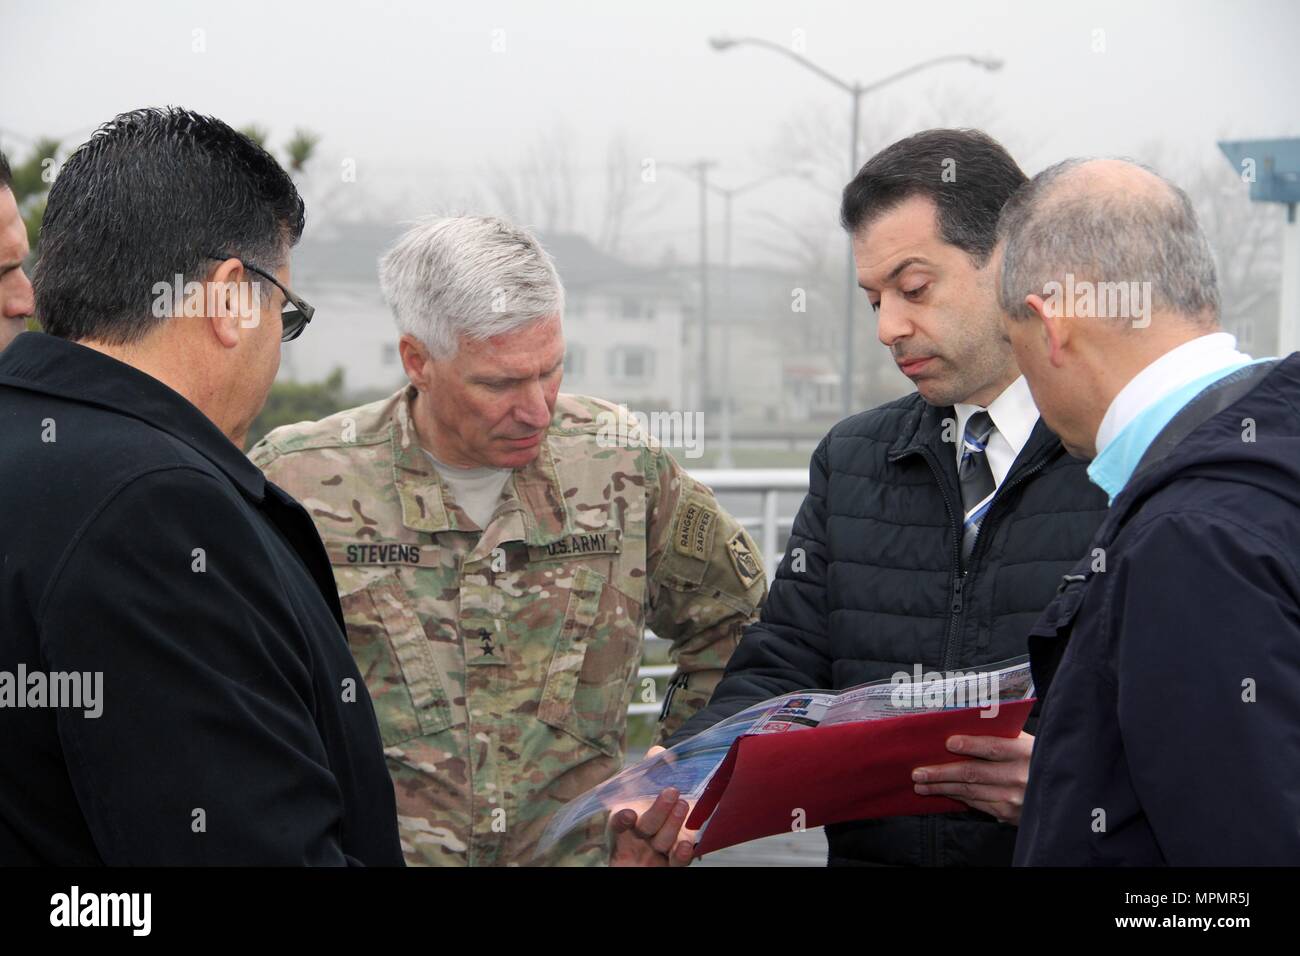 Frank Verga, New York District, U.S. Army Corps of Engineers (second from right), briefs U.S. Army Corps of Engineers Deputy Commanding General Maj. Gen. Rick Stevens (second from left) on April 4, 2017, describing details about Hurricane Sandy coastal storm risk management work planned for south Staten Island. Staten Island, a borough of New York City, suffered significant loss of life and property damage due to Hurricane Sandy's storm surge. Joe Vietri (left), North Atlantic Division's (NAD's) Chief of Planning, and Joe Forcina (right), NAD Sandy Coastal Management Division, provide regional Stock Photo